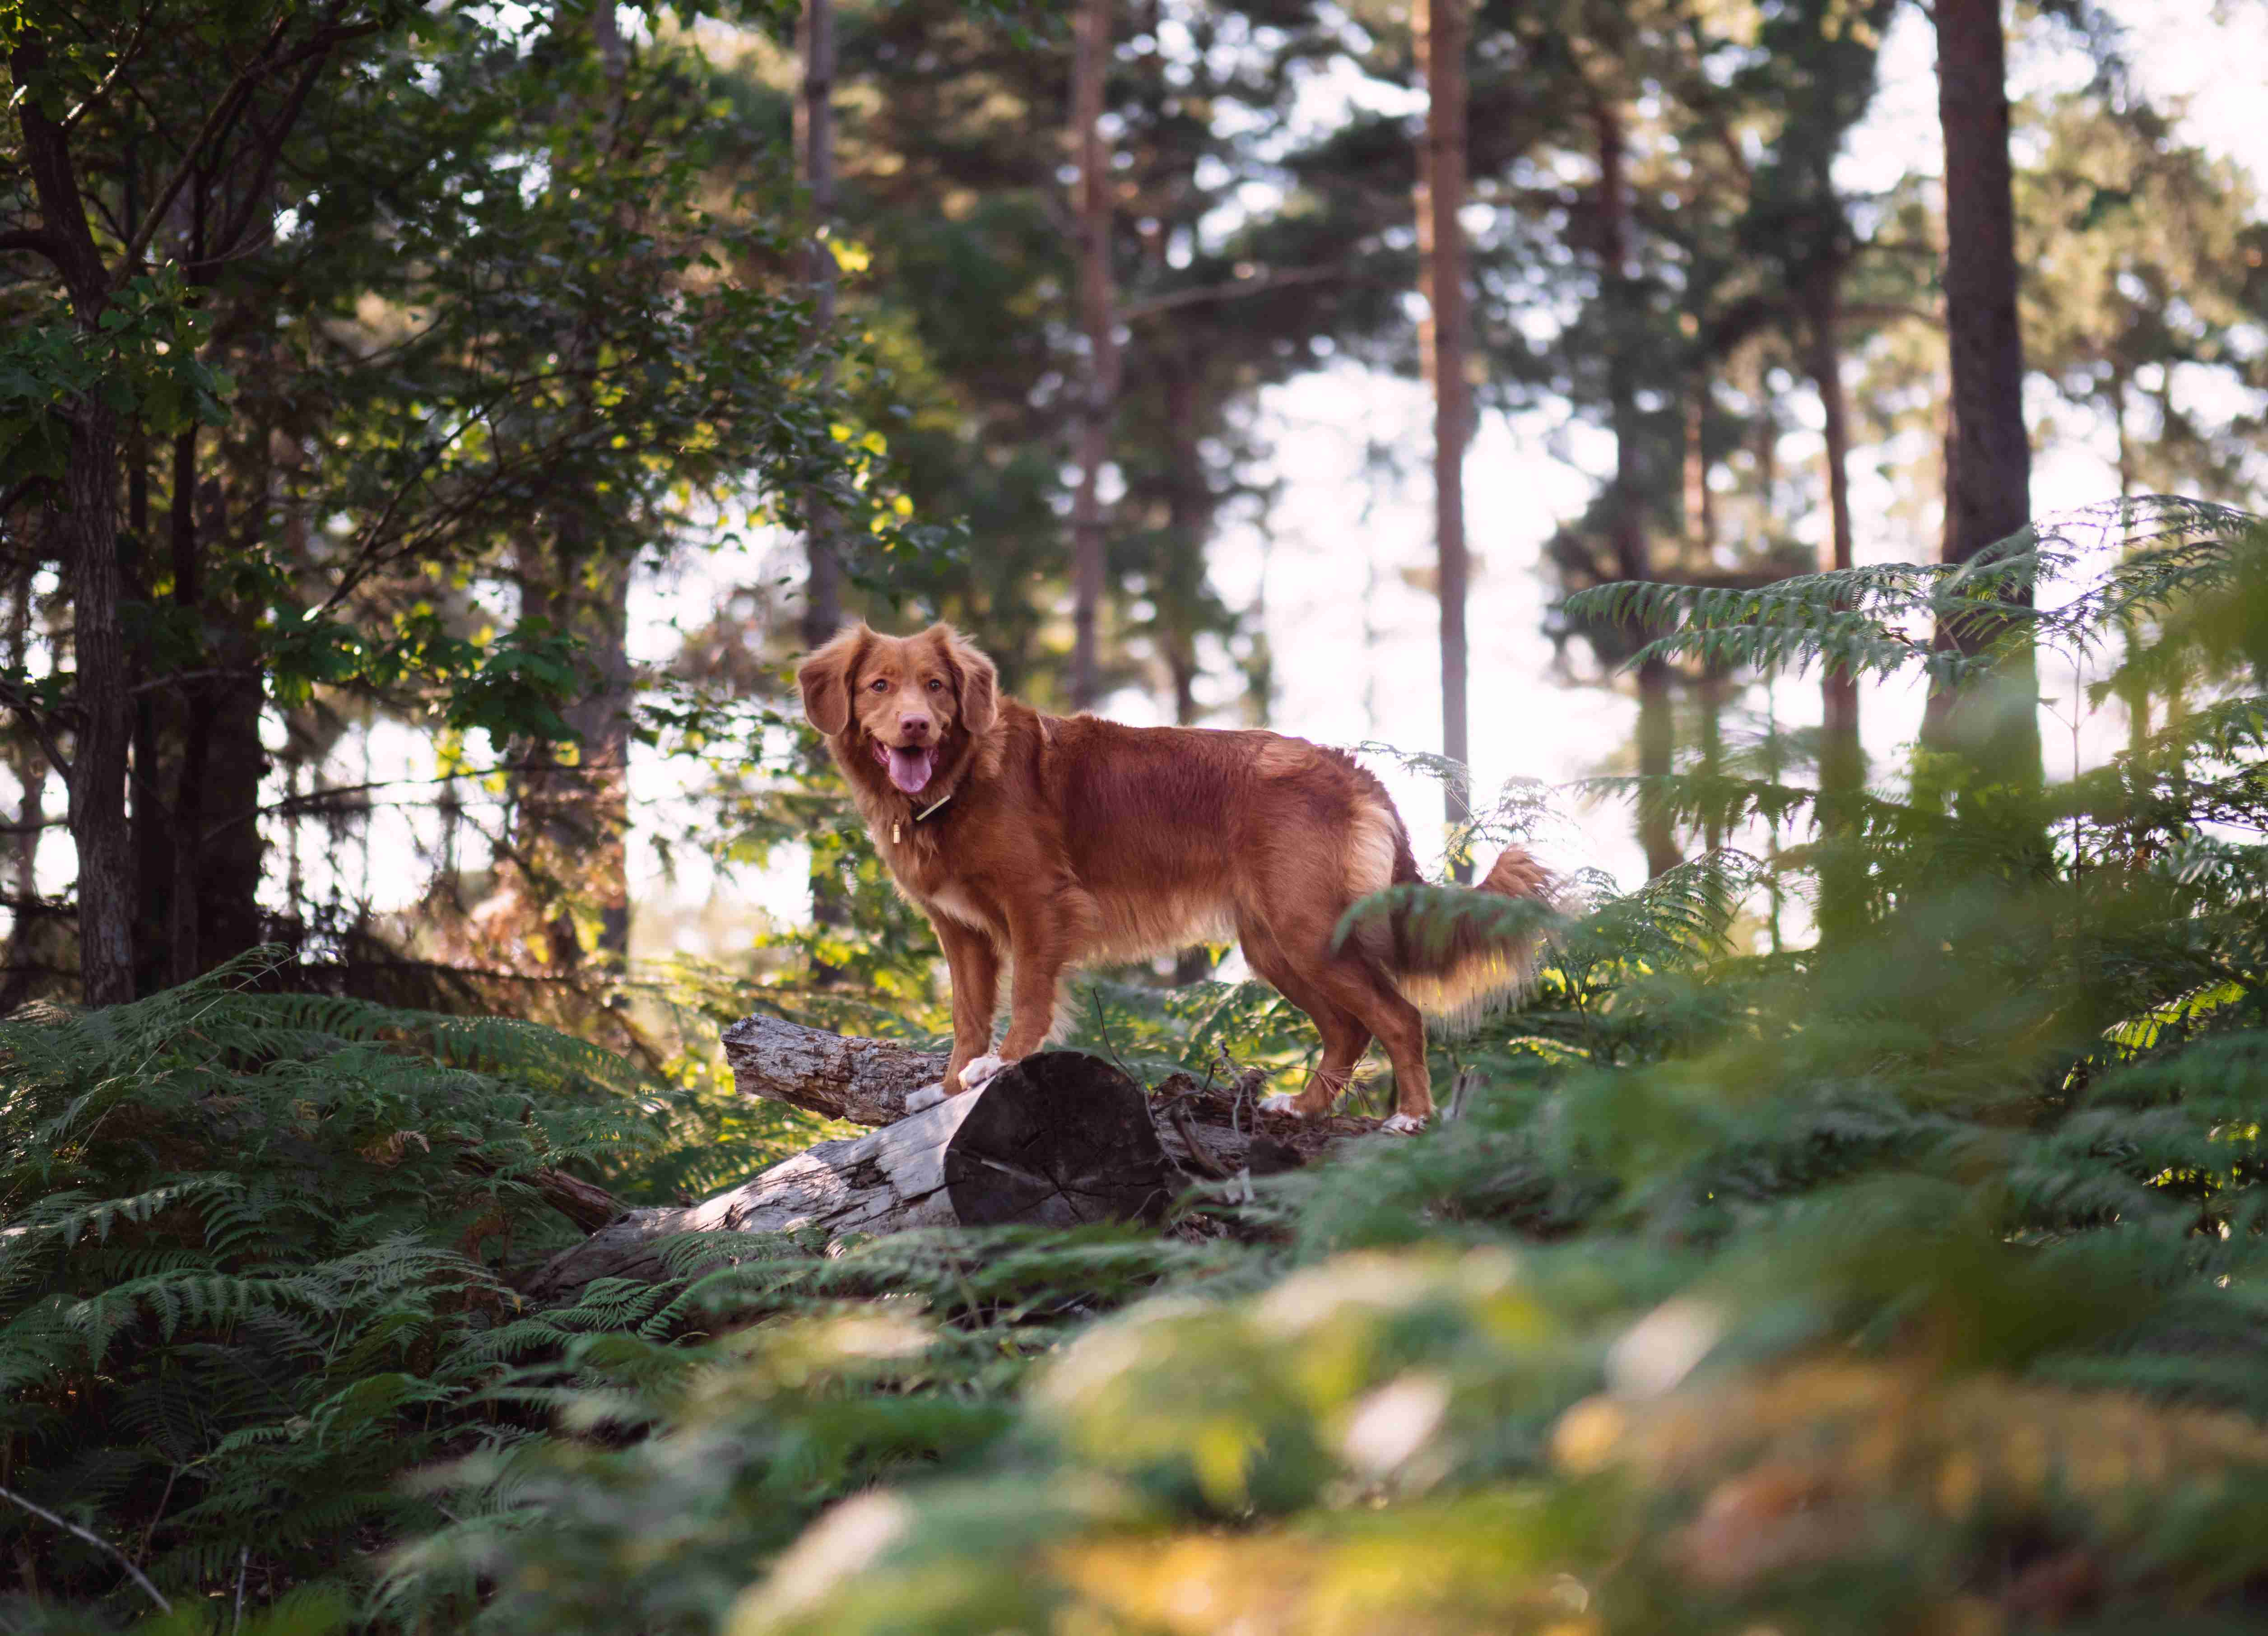 How can I prevent my golden retriever from developing anxiety?